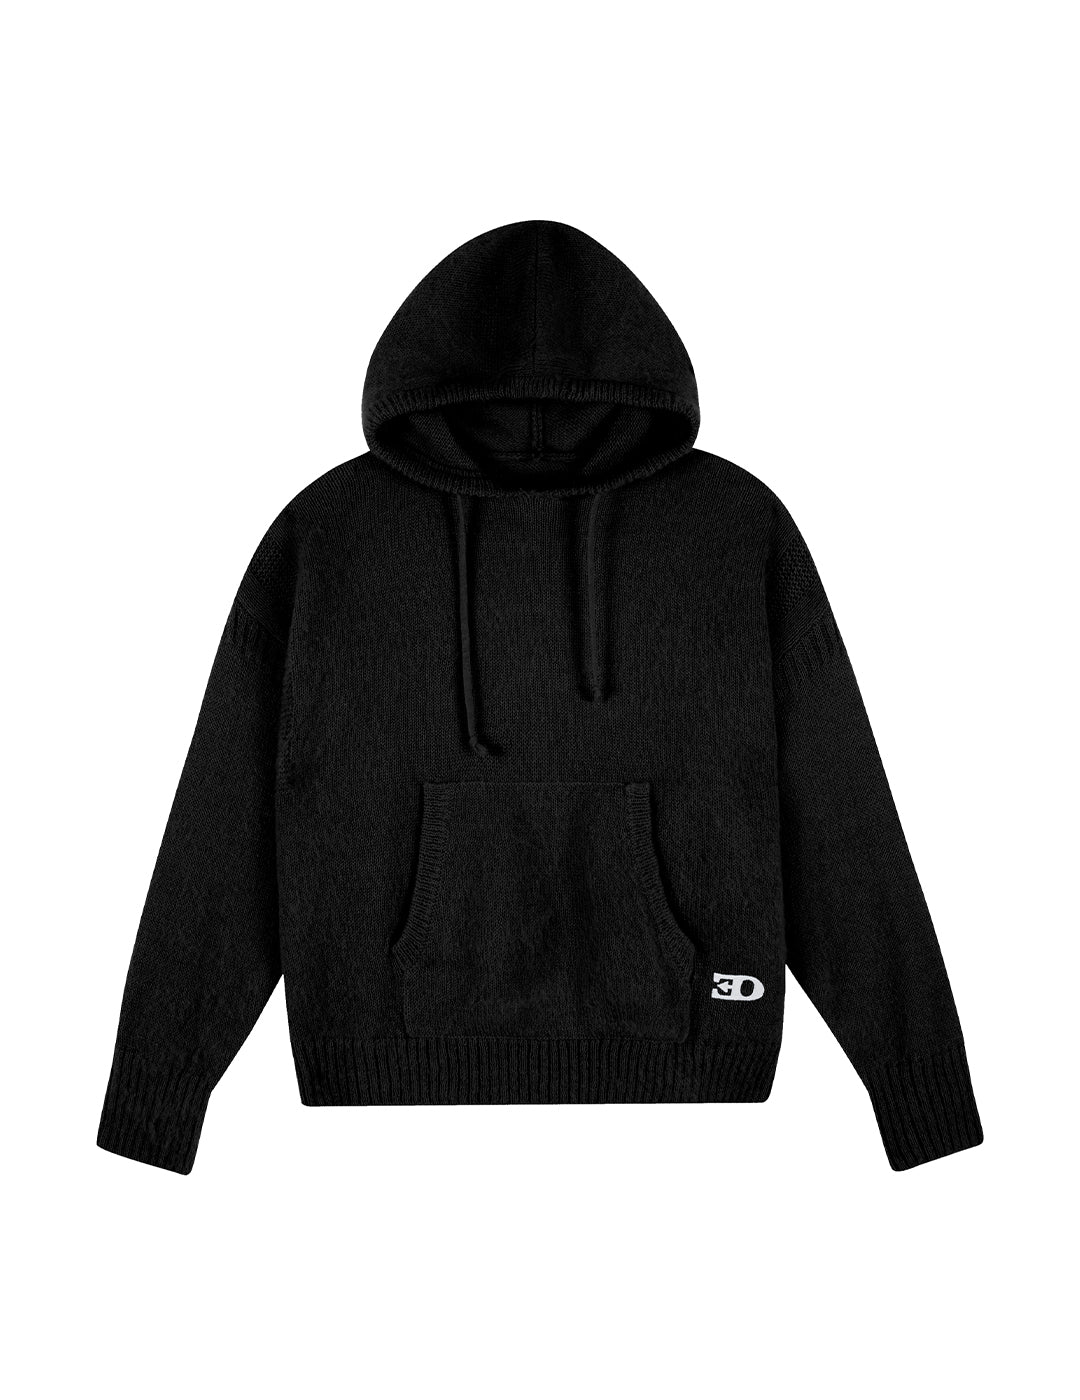 THE GUERNSEY HOODIE IN LIGHT BLACK MOHAIR